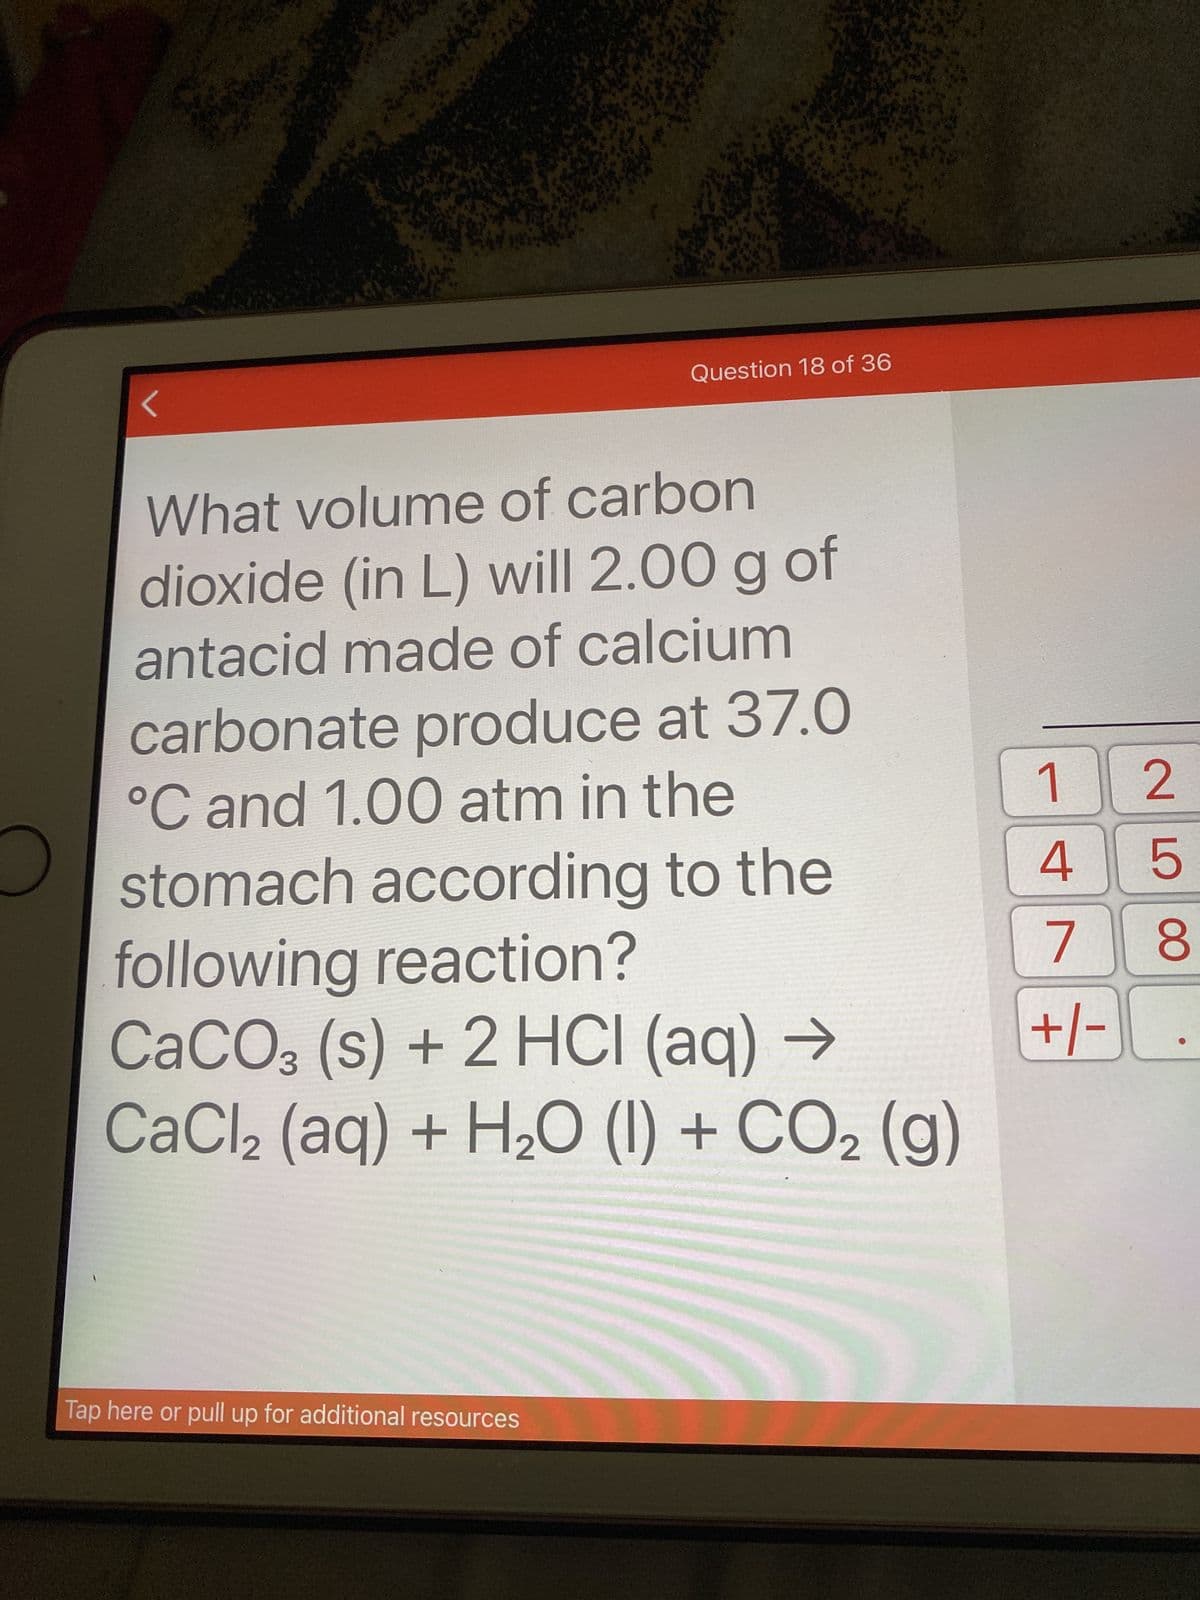 Question 18 of 36
What volume of carbon
dioxide (in L) will 2.00 g of
antacid made of calcium
carbonate produce at 37.0
°C and 1.00 atm in the
stomach according to the
following reaction?
CACO3 (s) + 2 HCI (aq) →
CaCl2 (aq) + H½O (1) + CO2 (g)
9 |ヤ
8.
7.
-+/-
Tap here or pull up for additional resources
